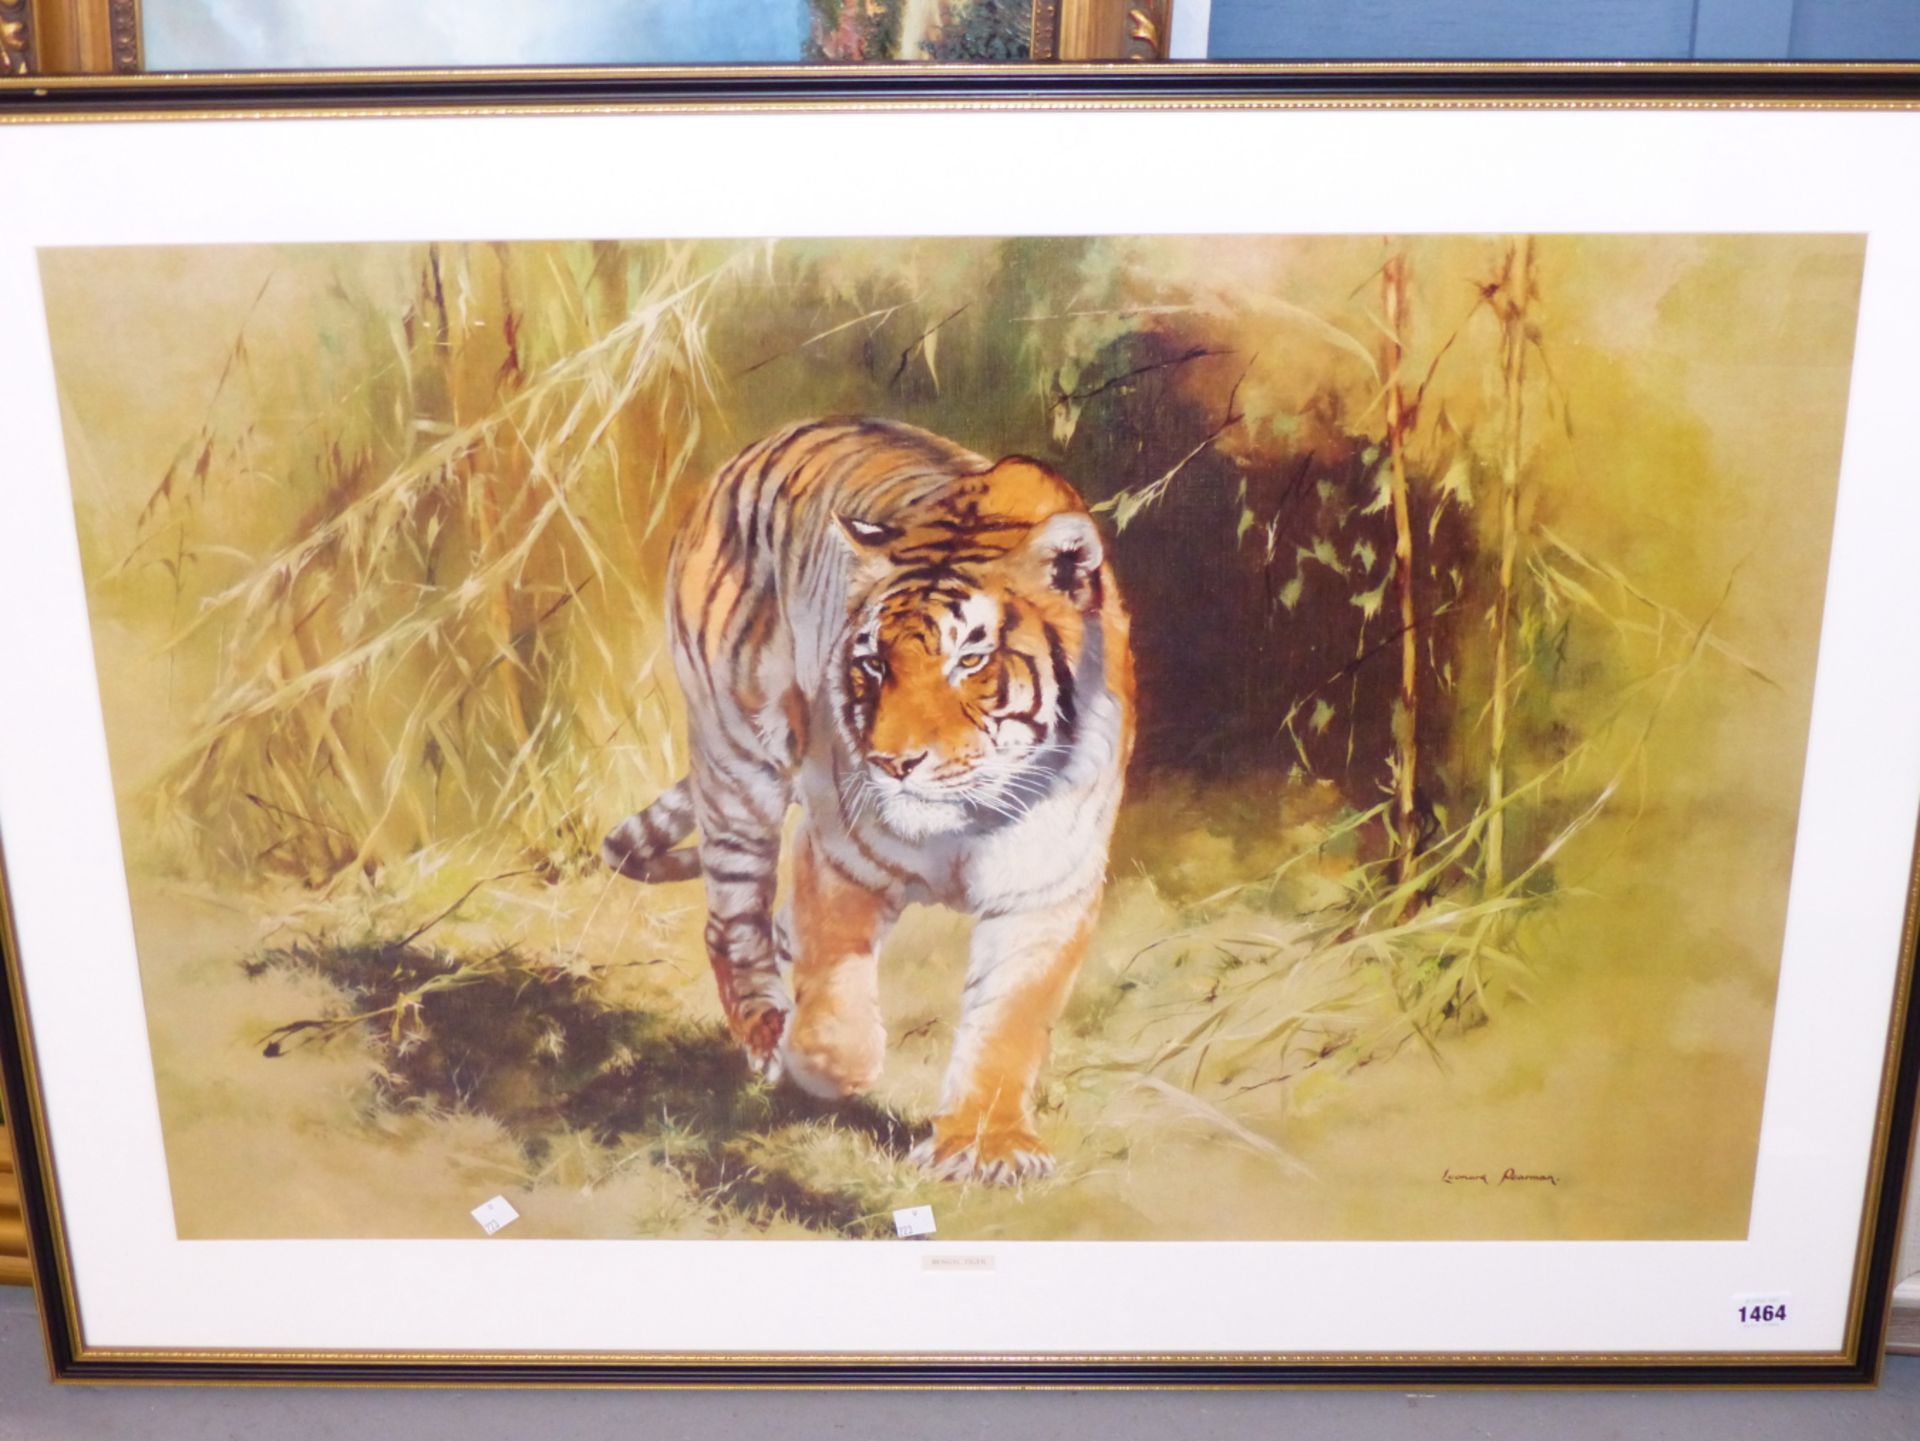 AFTER LEONARD PEARMAN A COLOUR PRINT OF A BENGAL TIGER. 54 x 84cms - Image 2 of 6